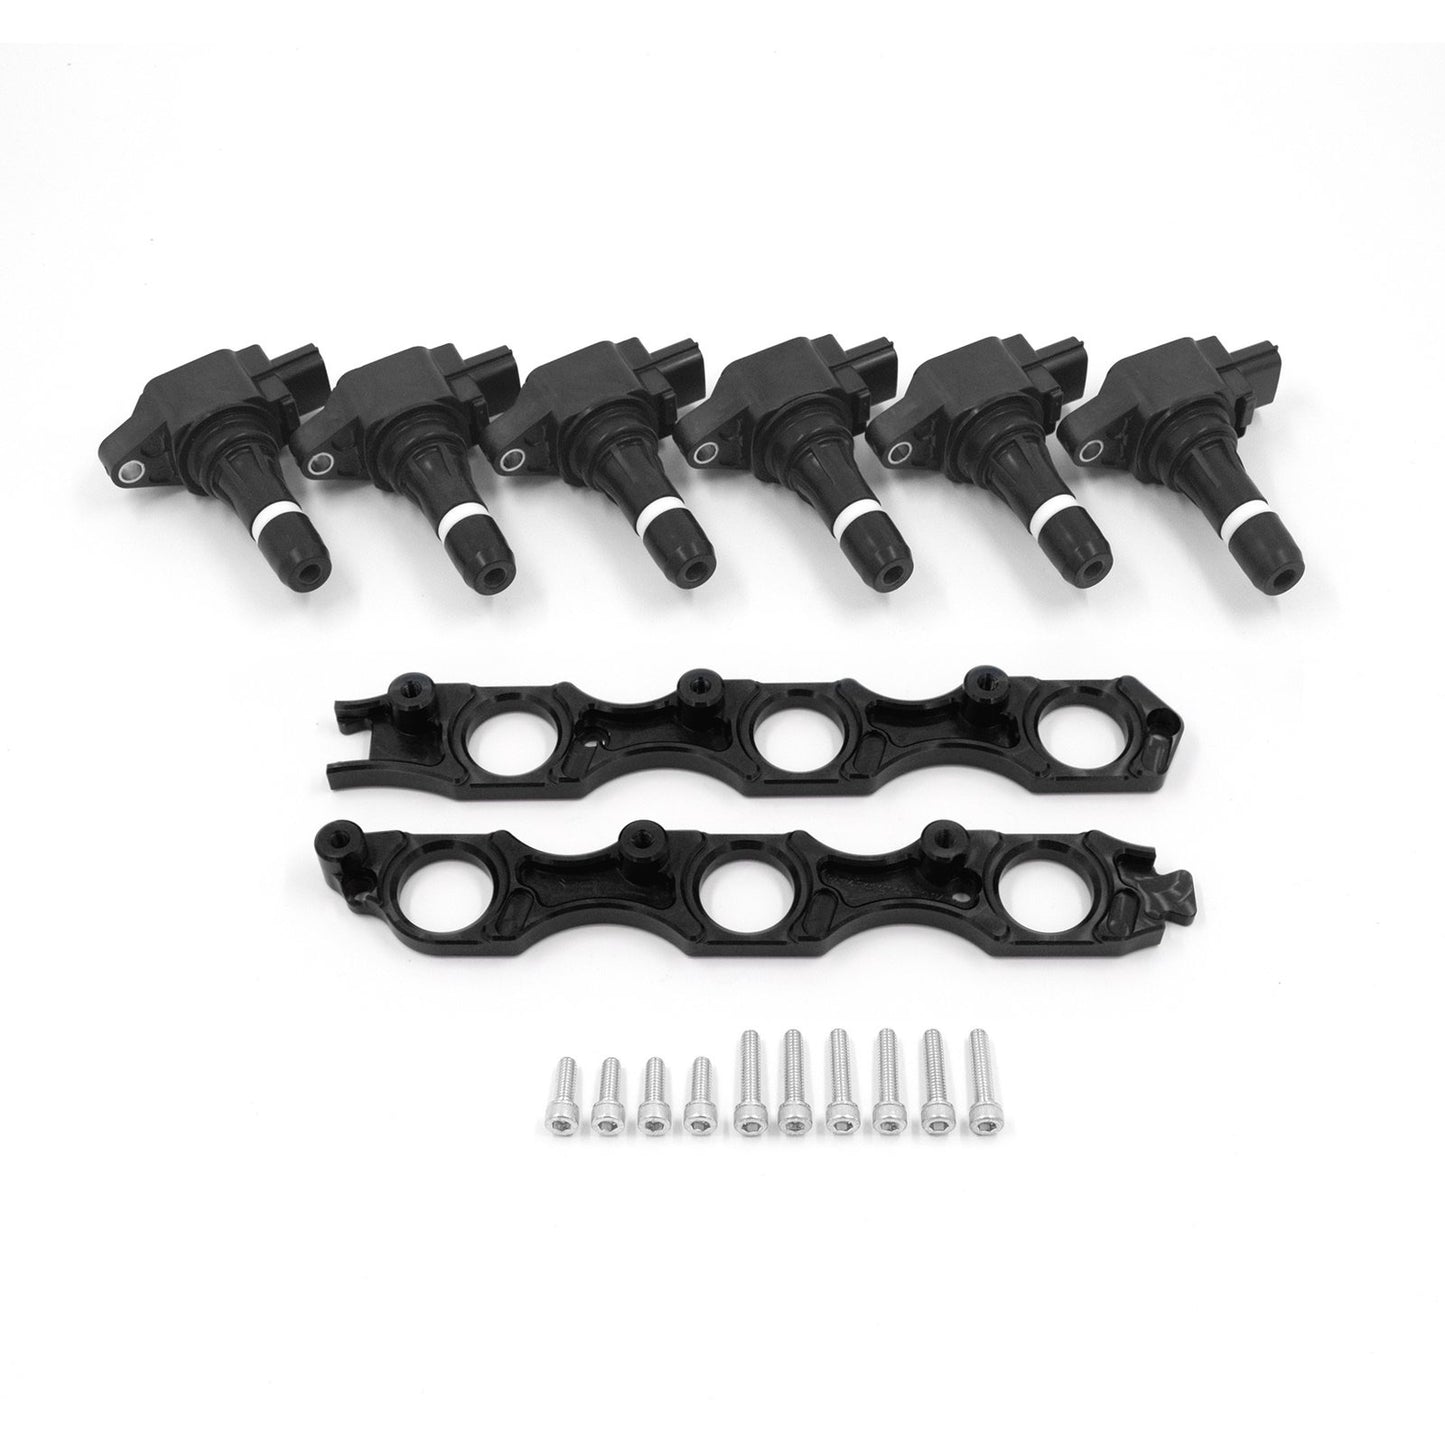 VR38 R35 Coil Kit for Toyota JZ Engines